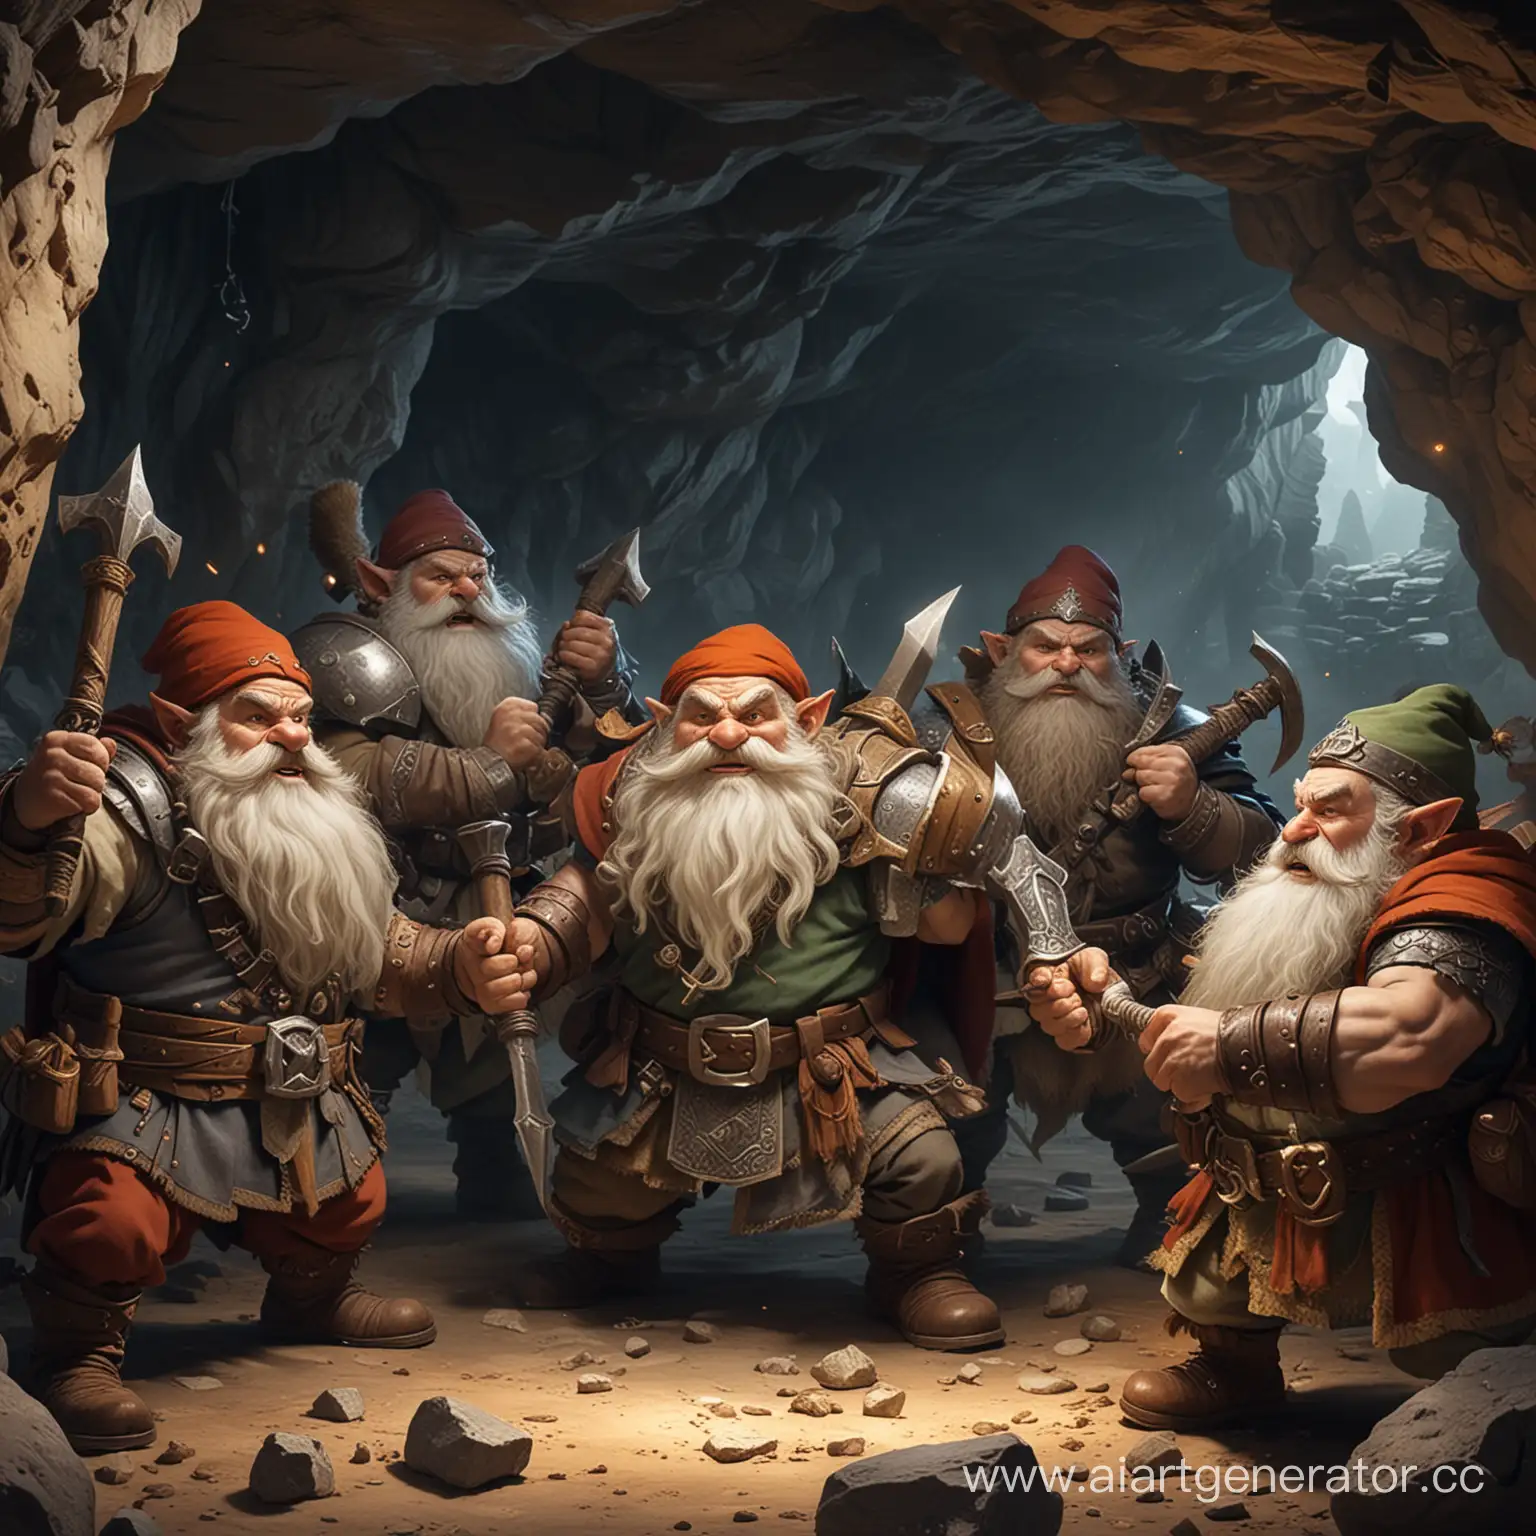 Valiant-Dwarves-Defending-Hidden-Treasure-from-fearsome-Monsters-in-a-Mysterious-Cave